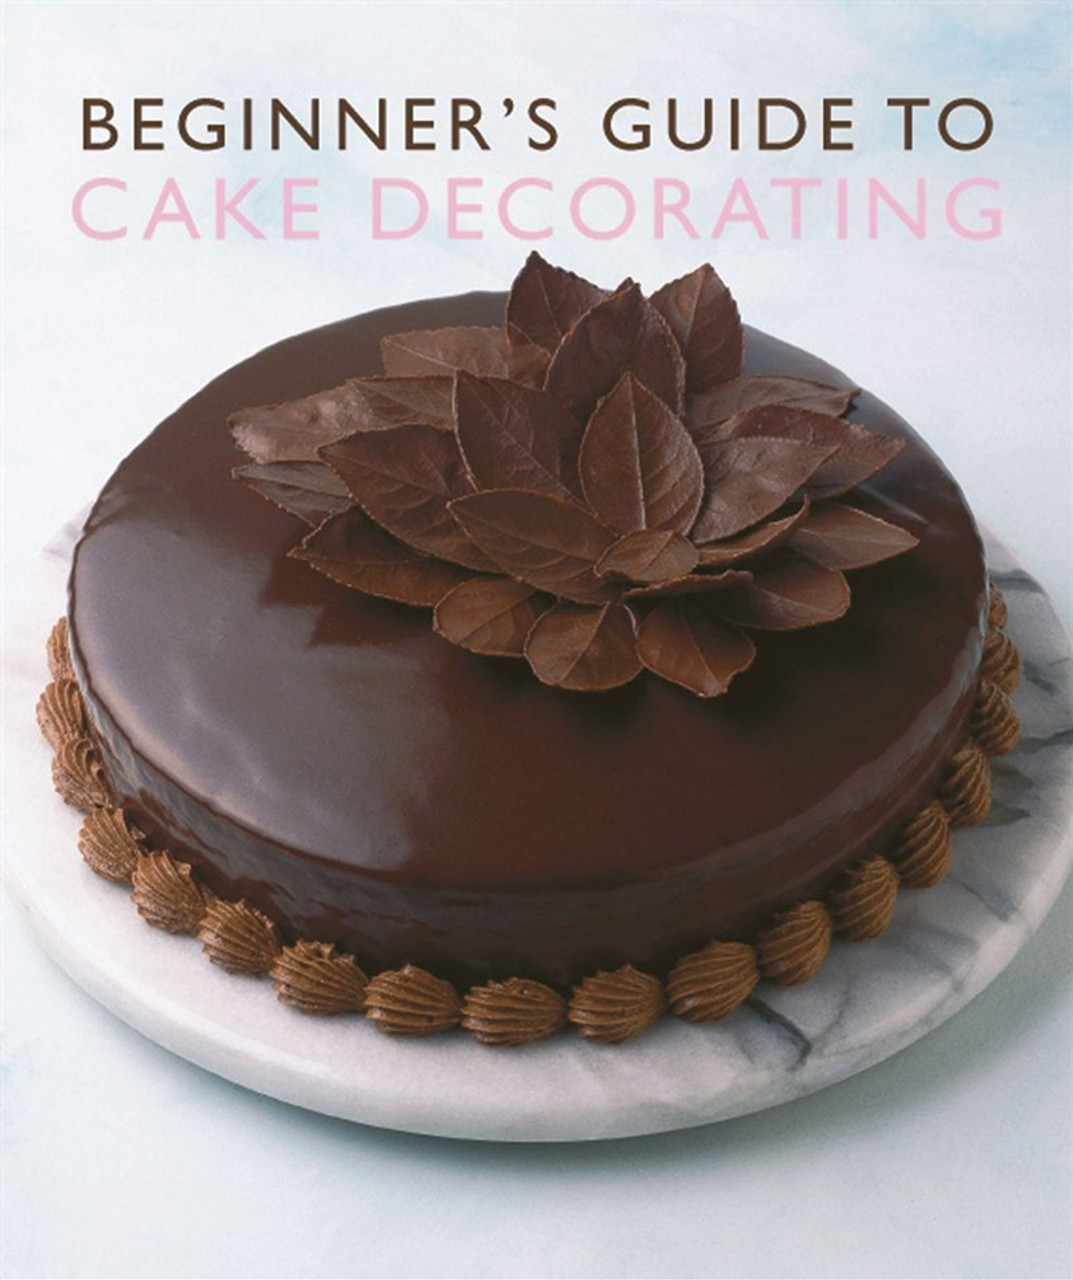 How To Frost A Cake - Beginner's Guide